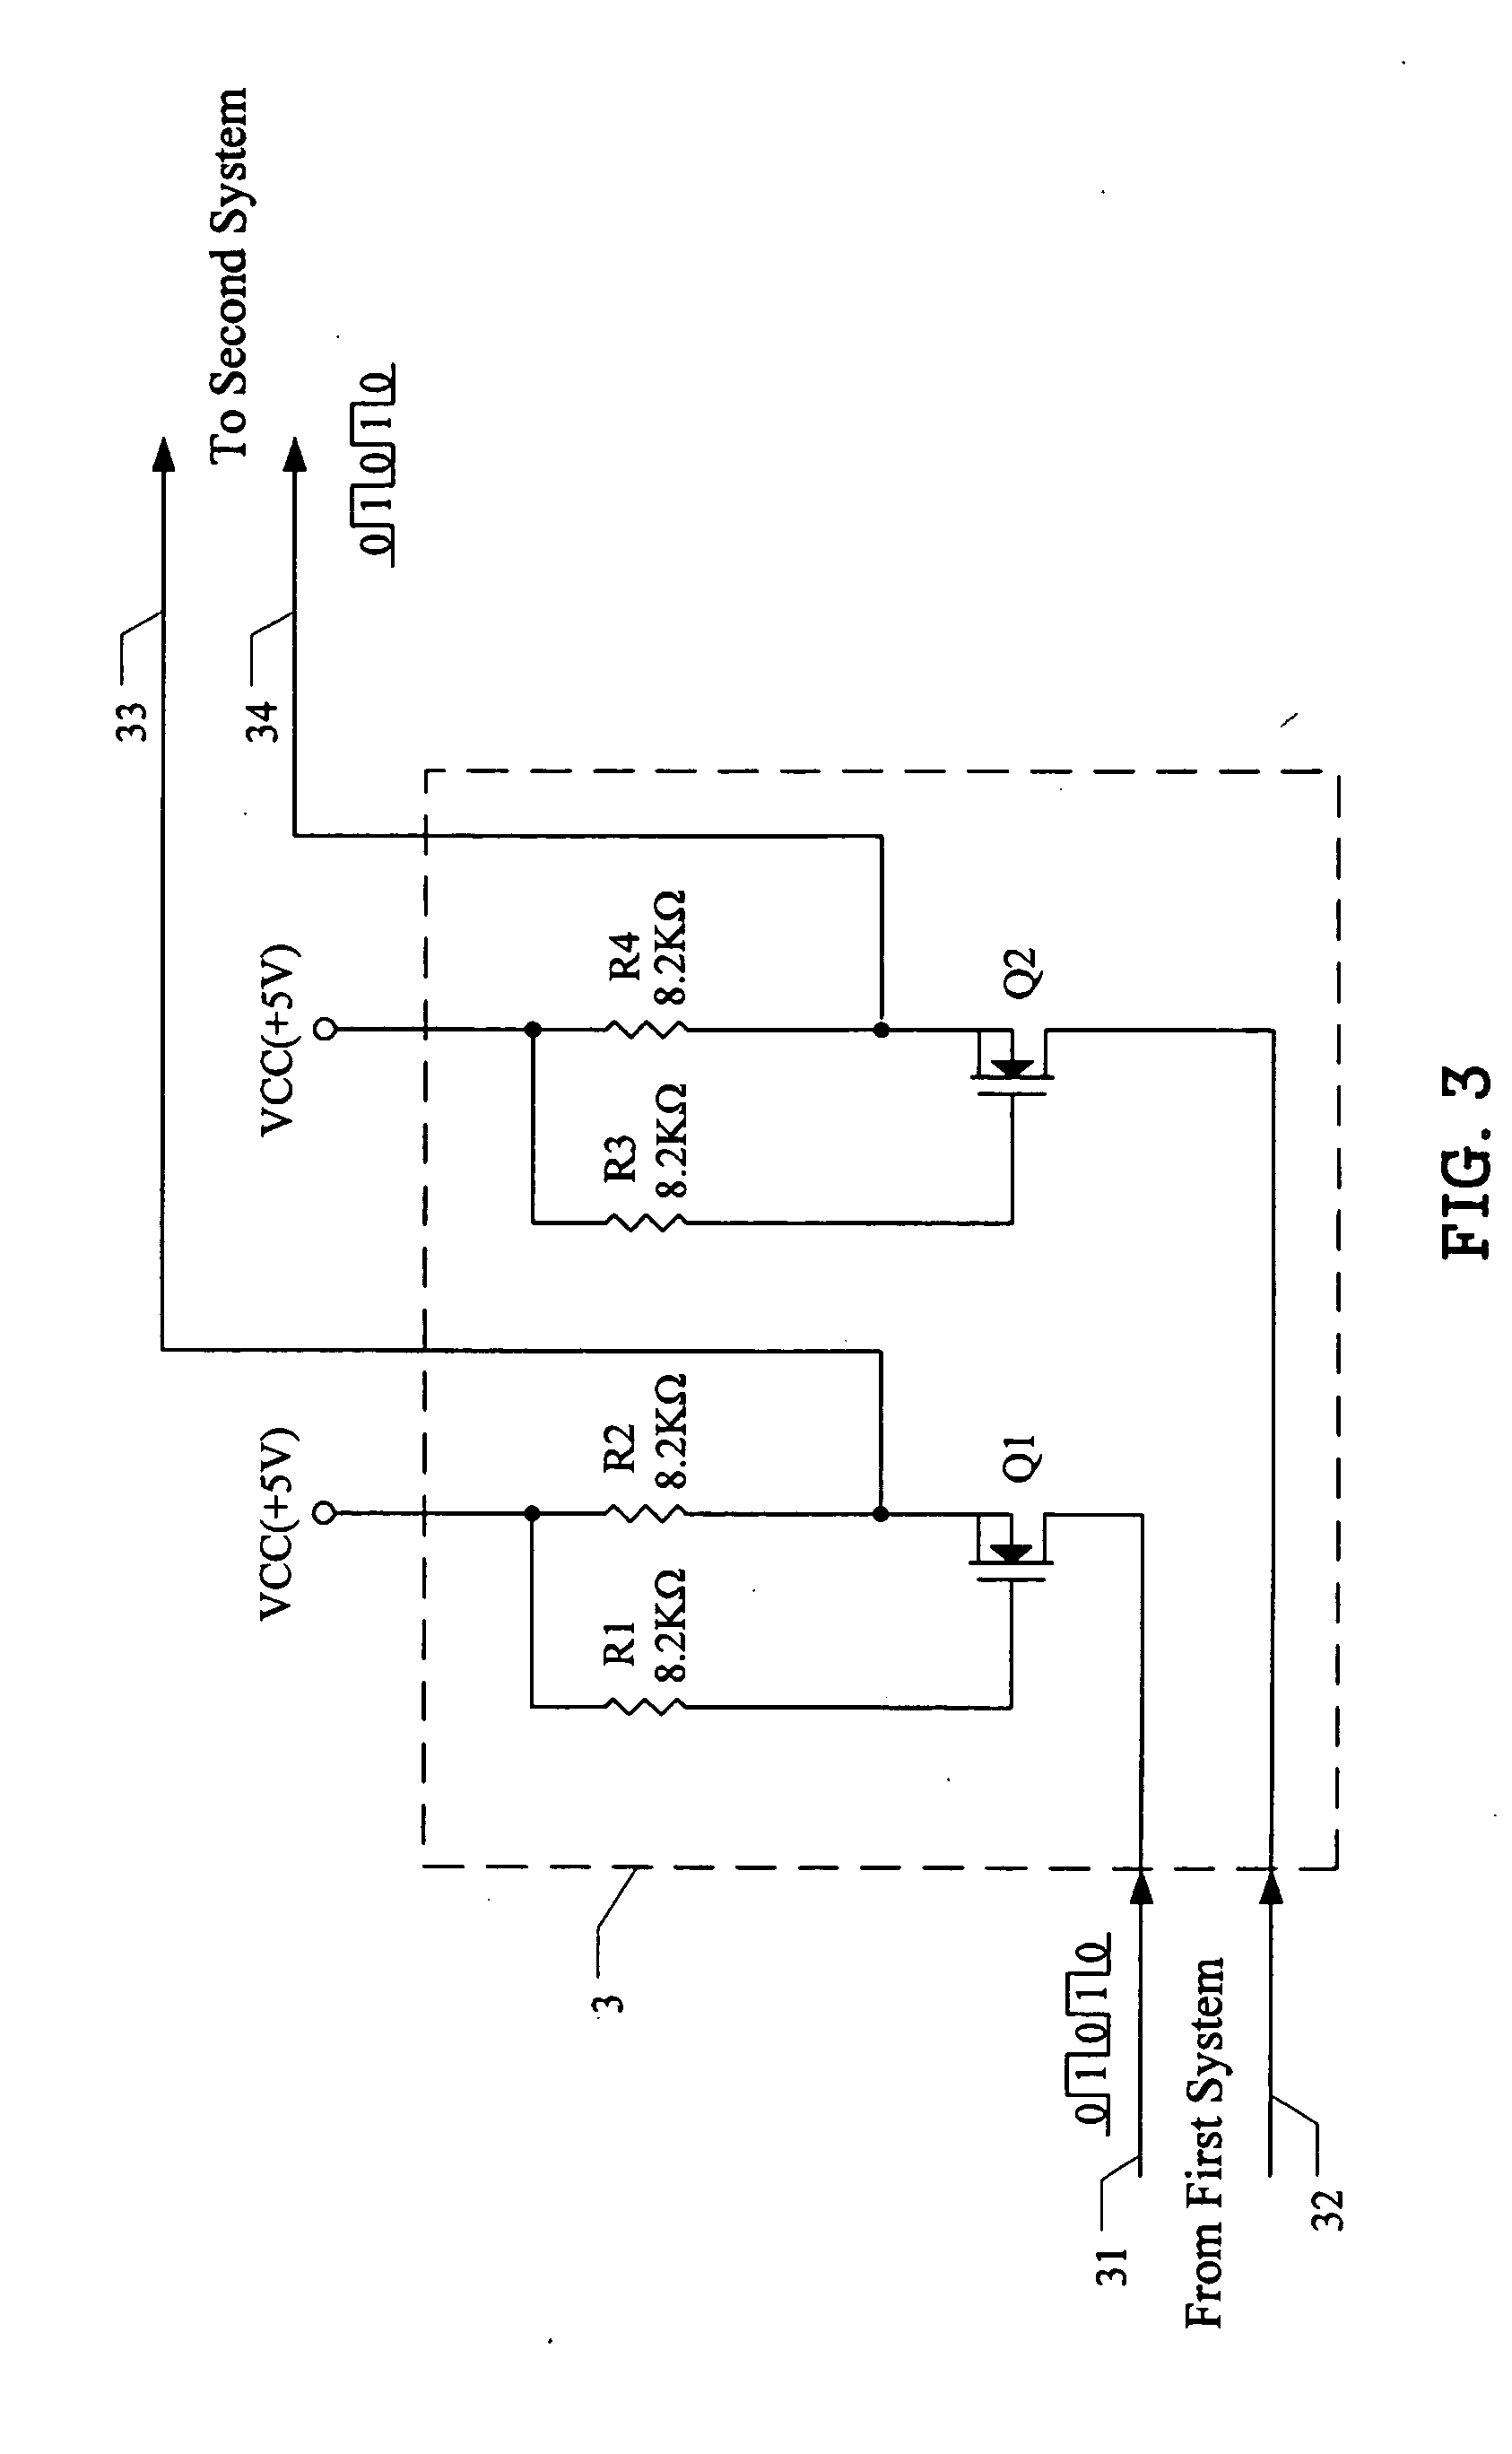 Circuit for eliminating leakage current in signal transmission